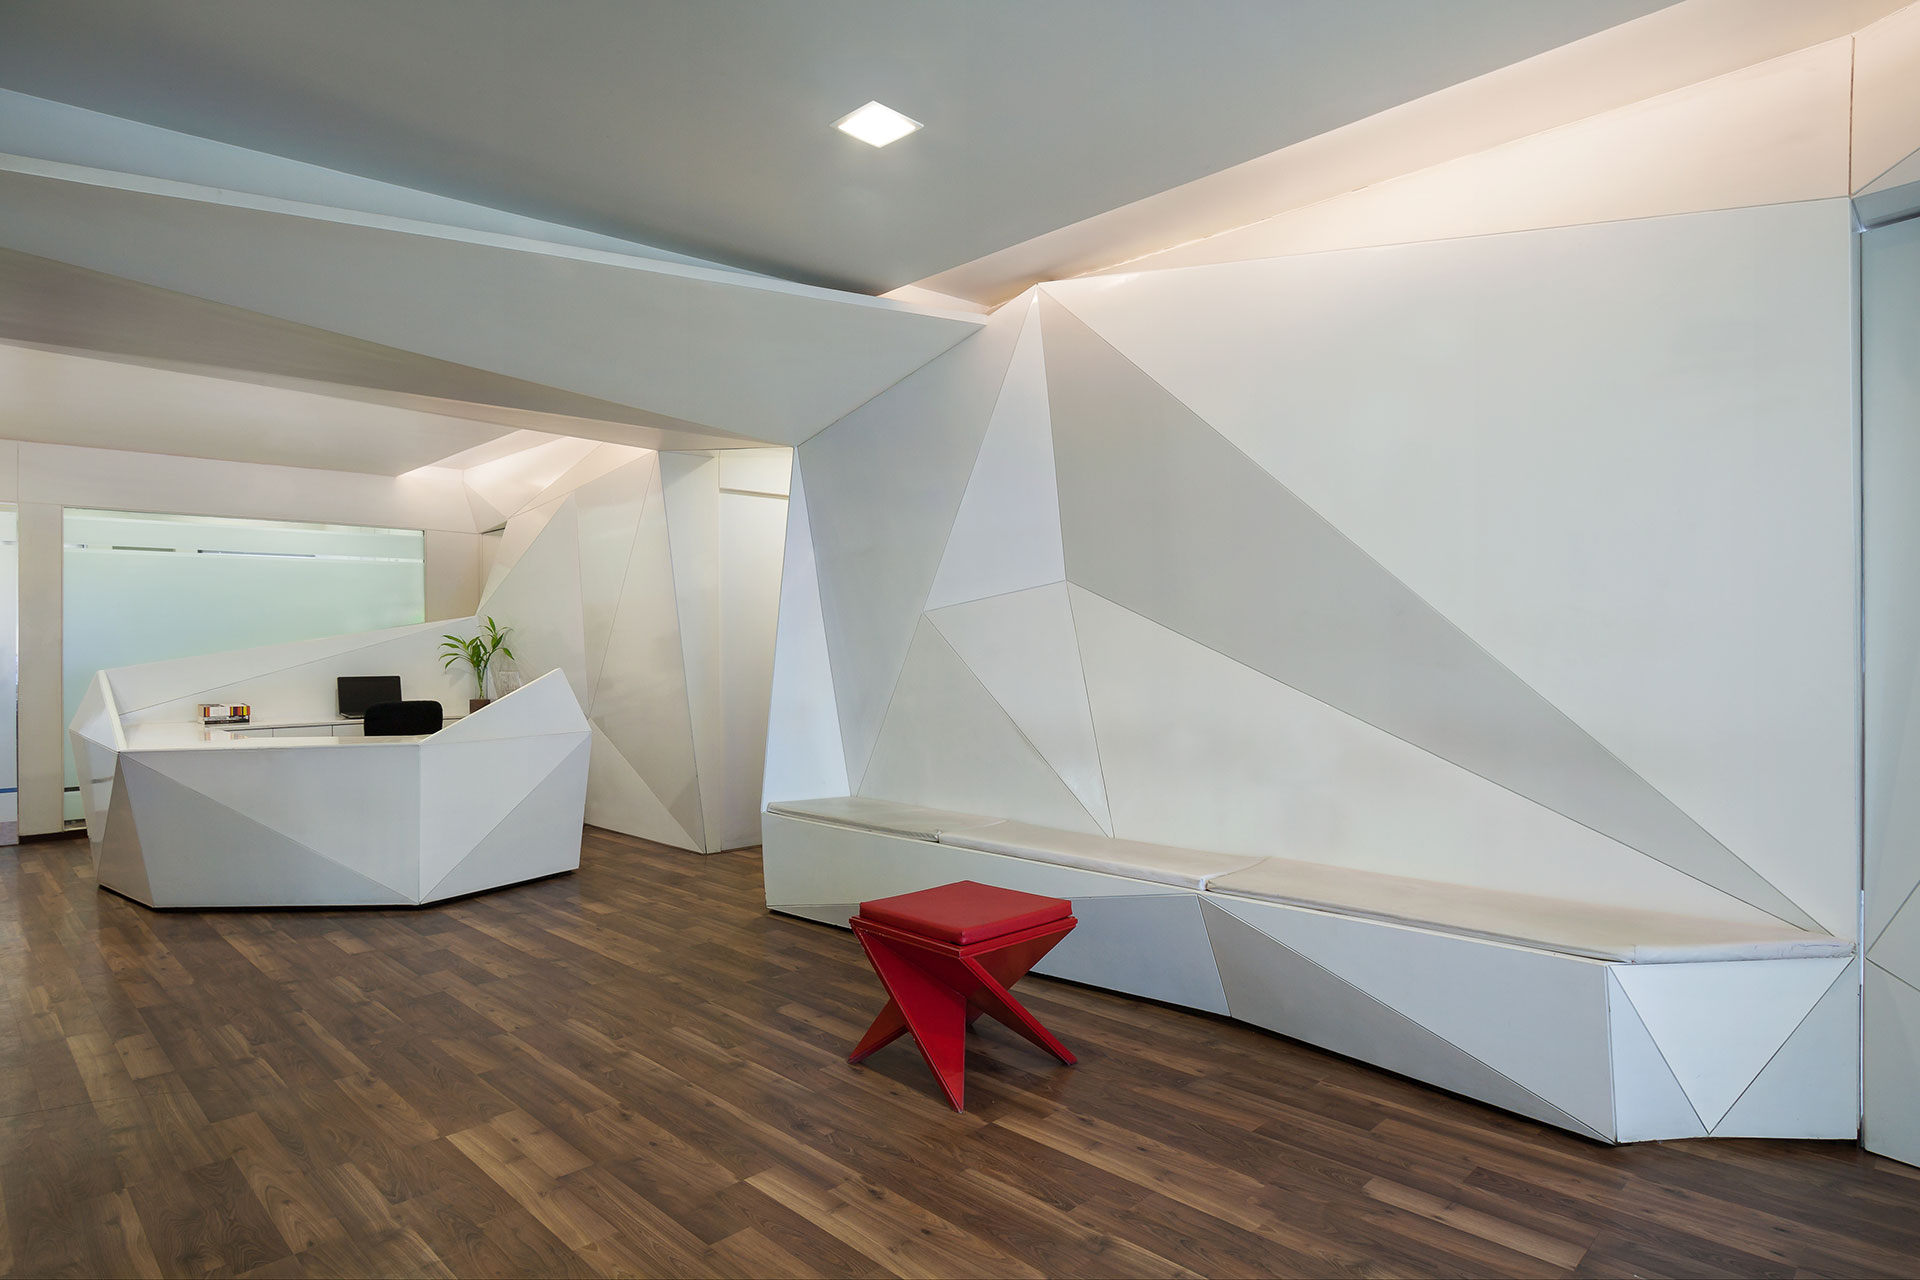 The main feature wall in the reception and waiting area folds to envelope a bench for patients. At the other end the wall folds out forming the reception table.